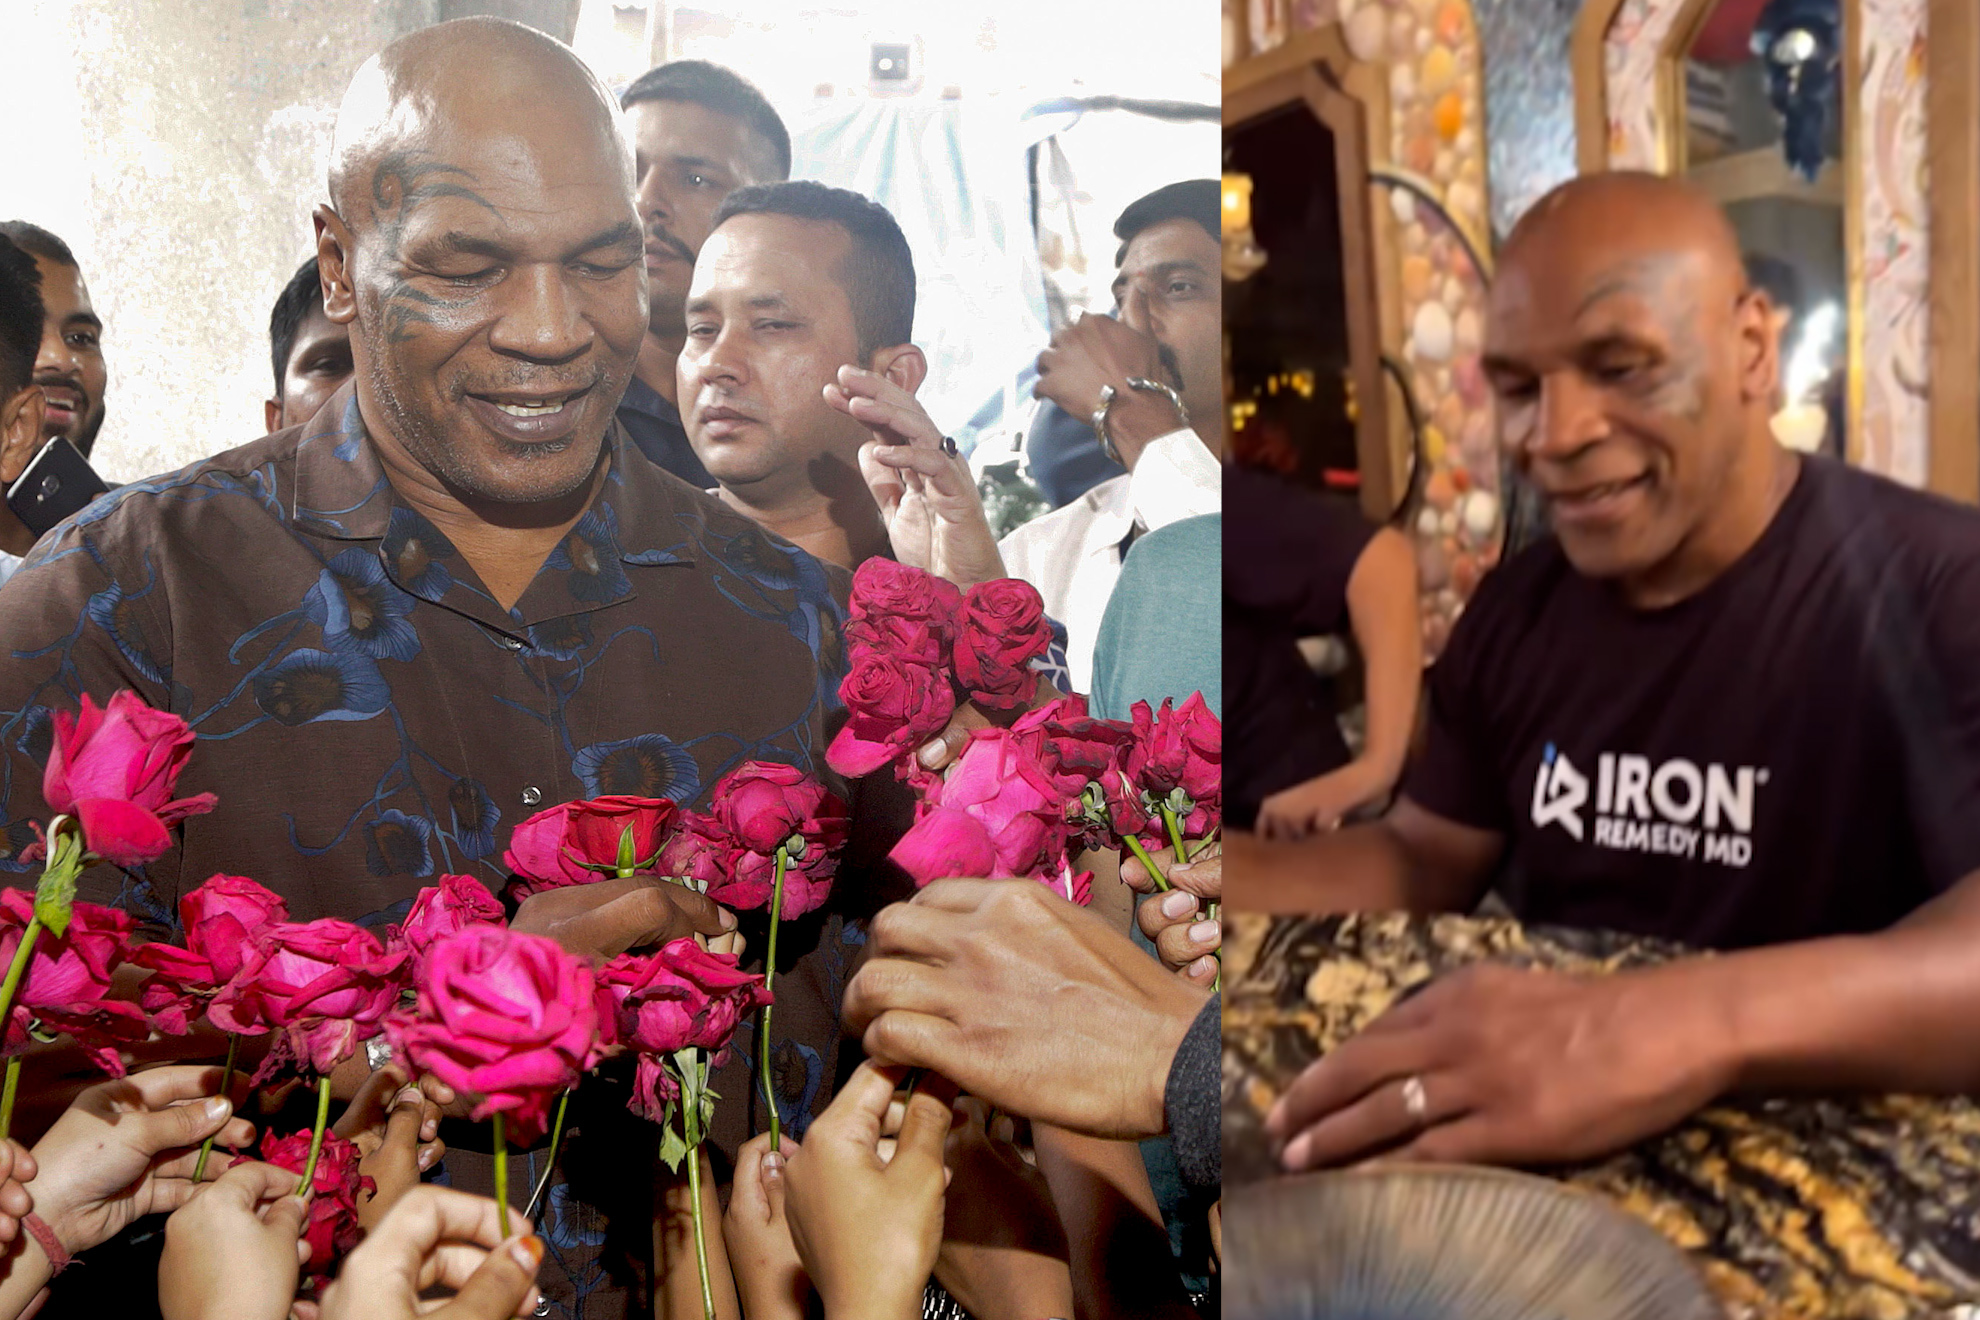 Mike Tyson fans notice worry detail during private dinner celebration